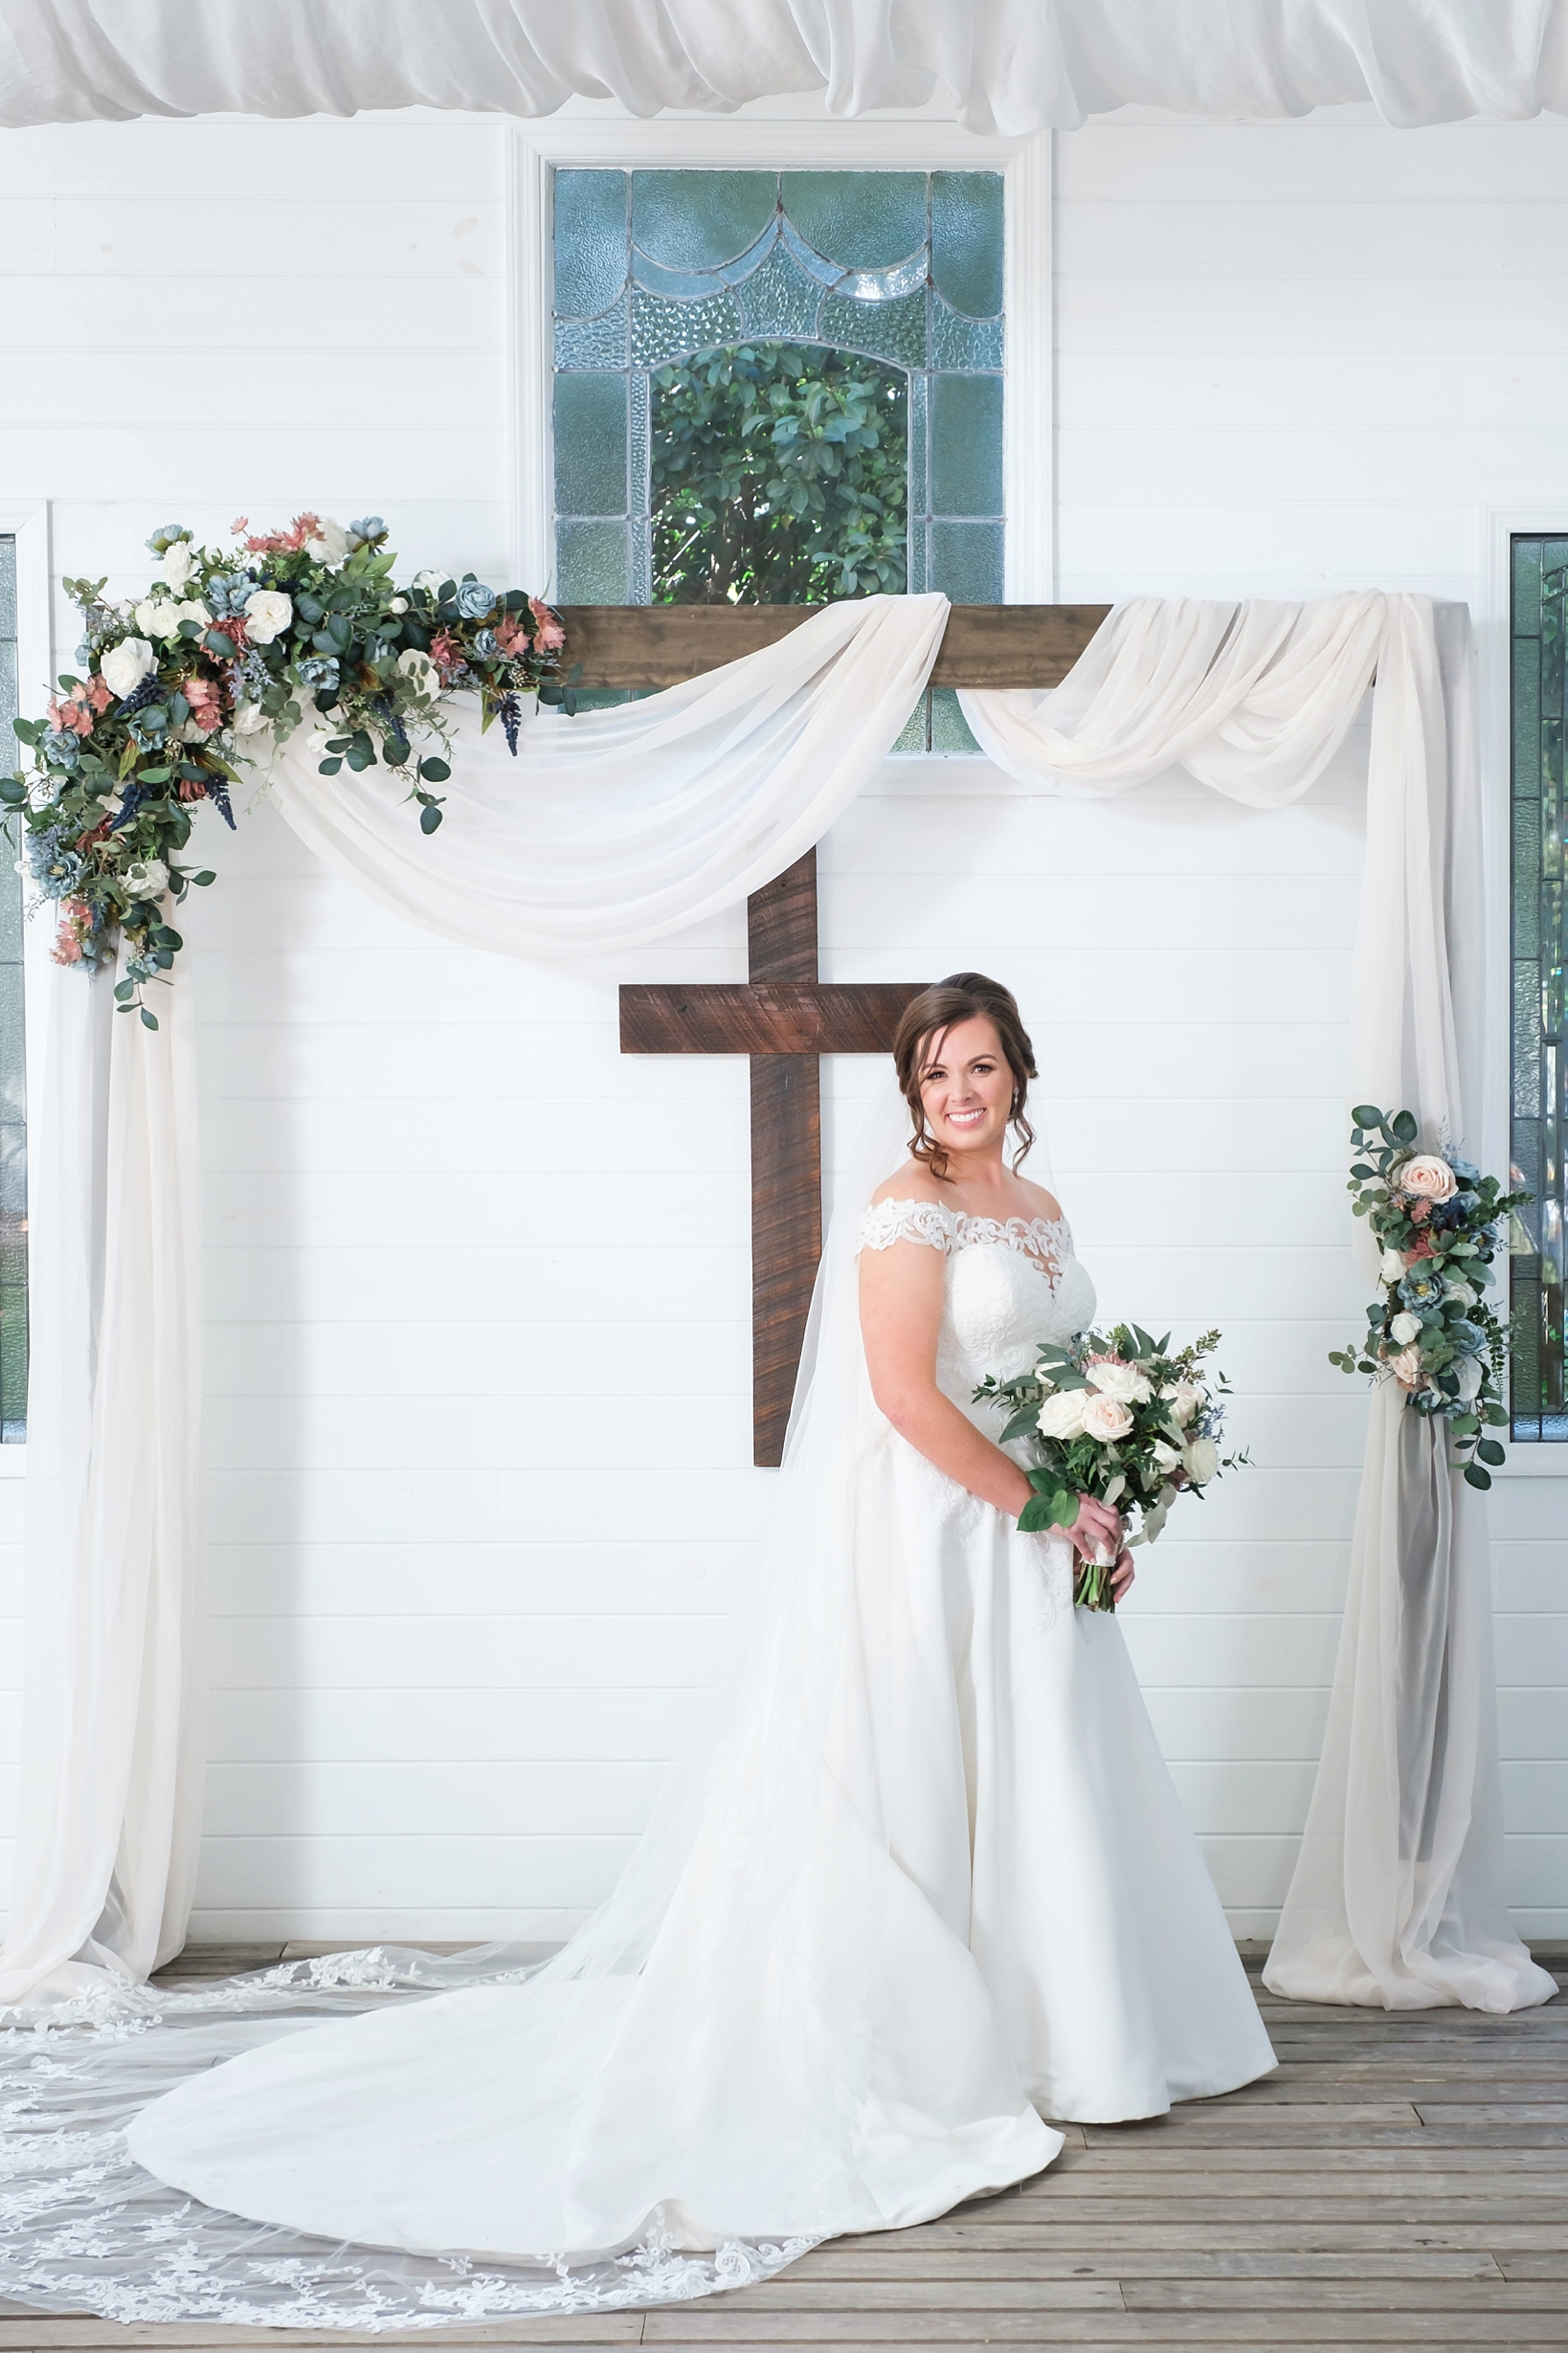 A portrait of the Bride standing up at the altar holding her floral bouquet